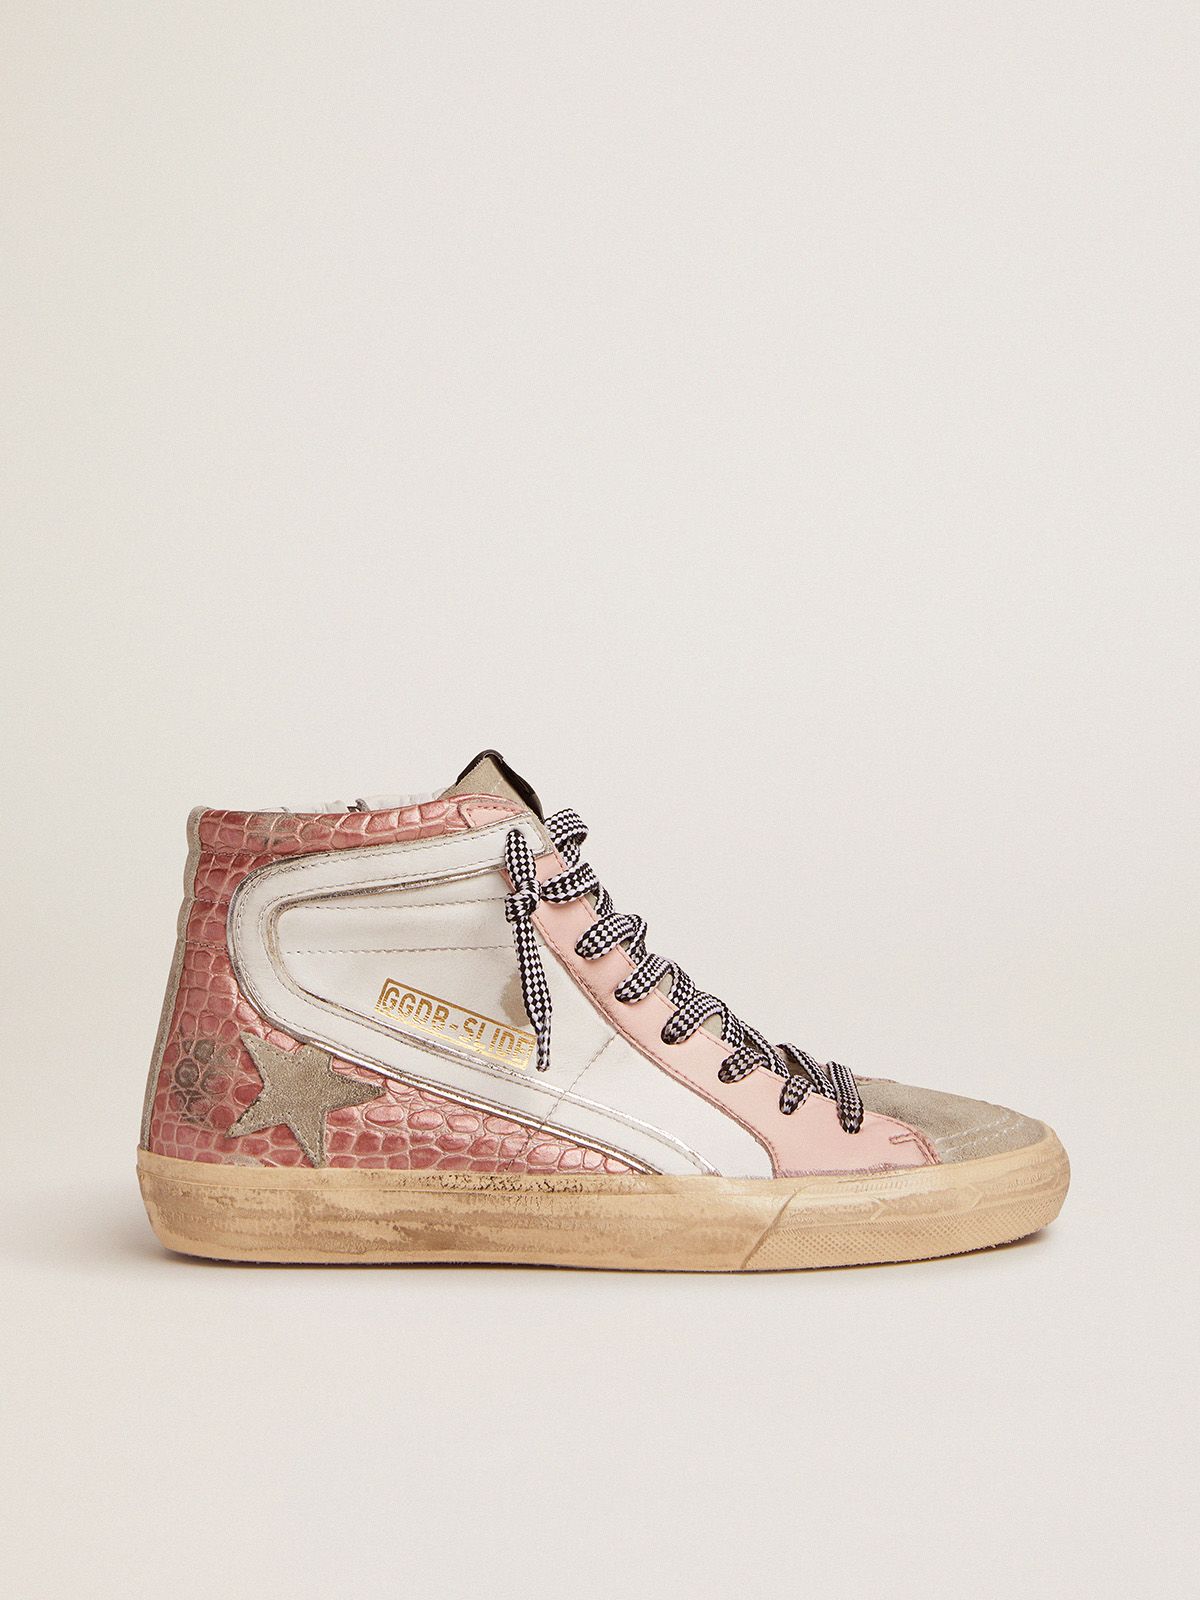 golden goose and Slide crocodile-print leather pink sneakers upper white with